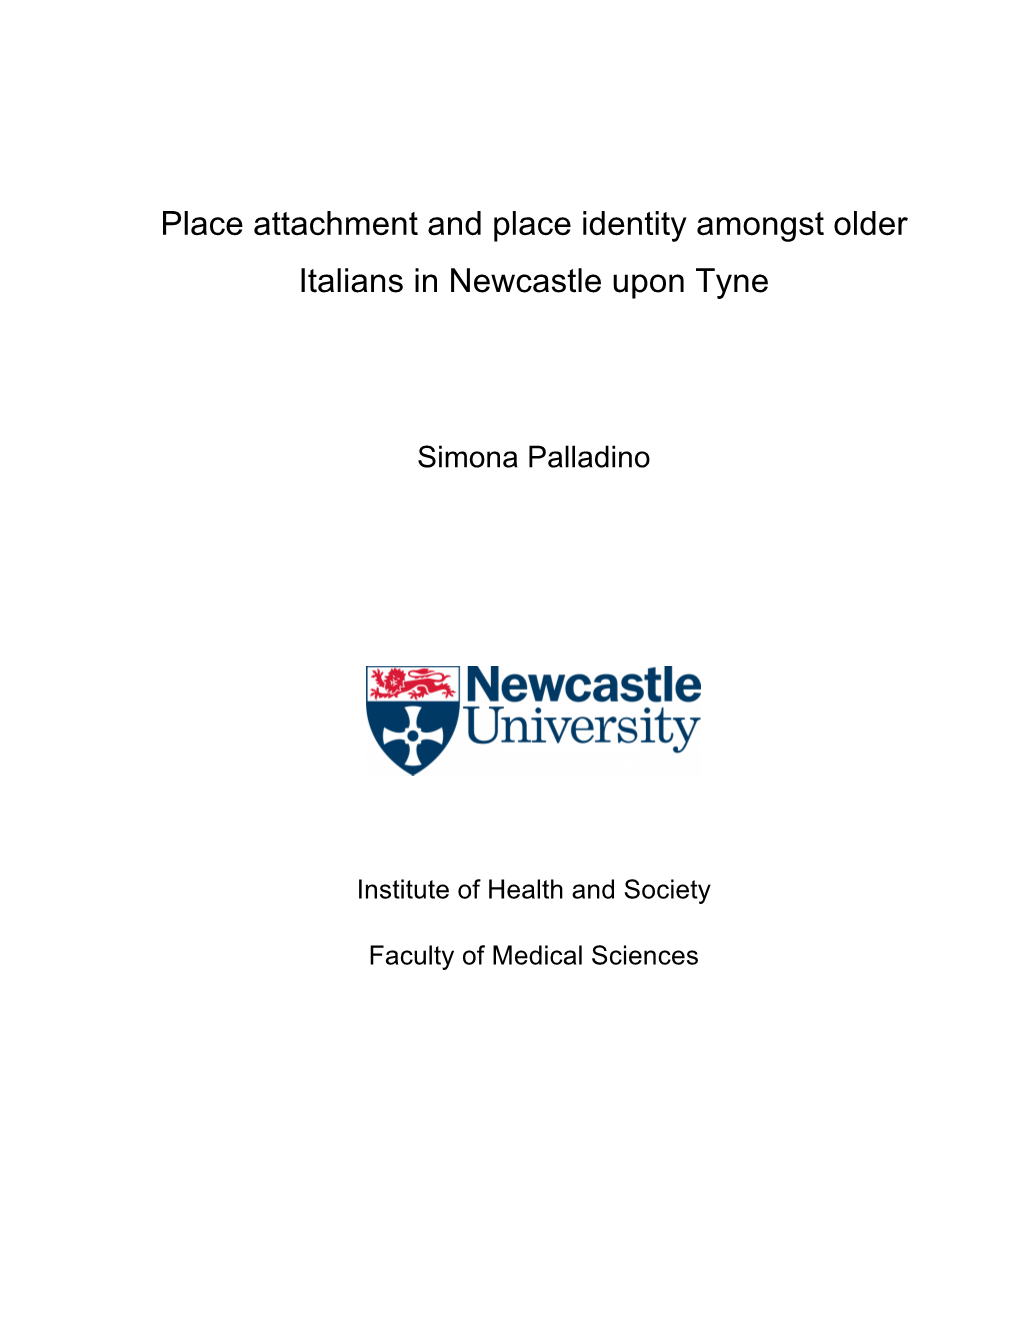 Place Attachment and Place Identity Amongst Older Italians in Newcastle Upon Tyne